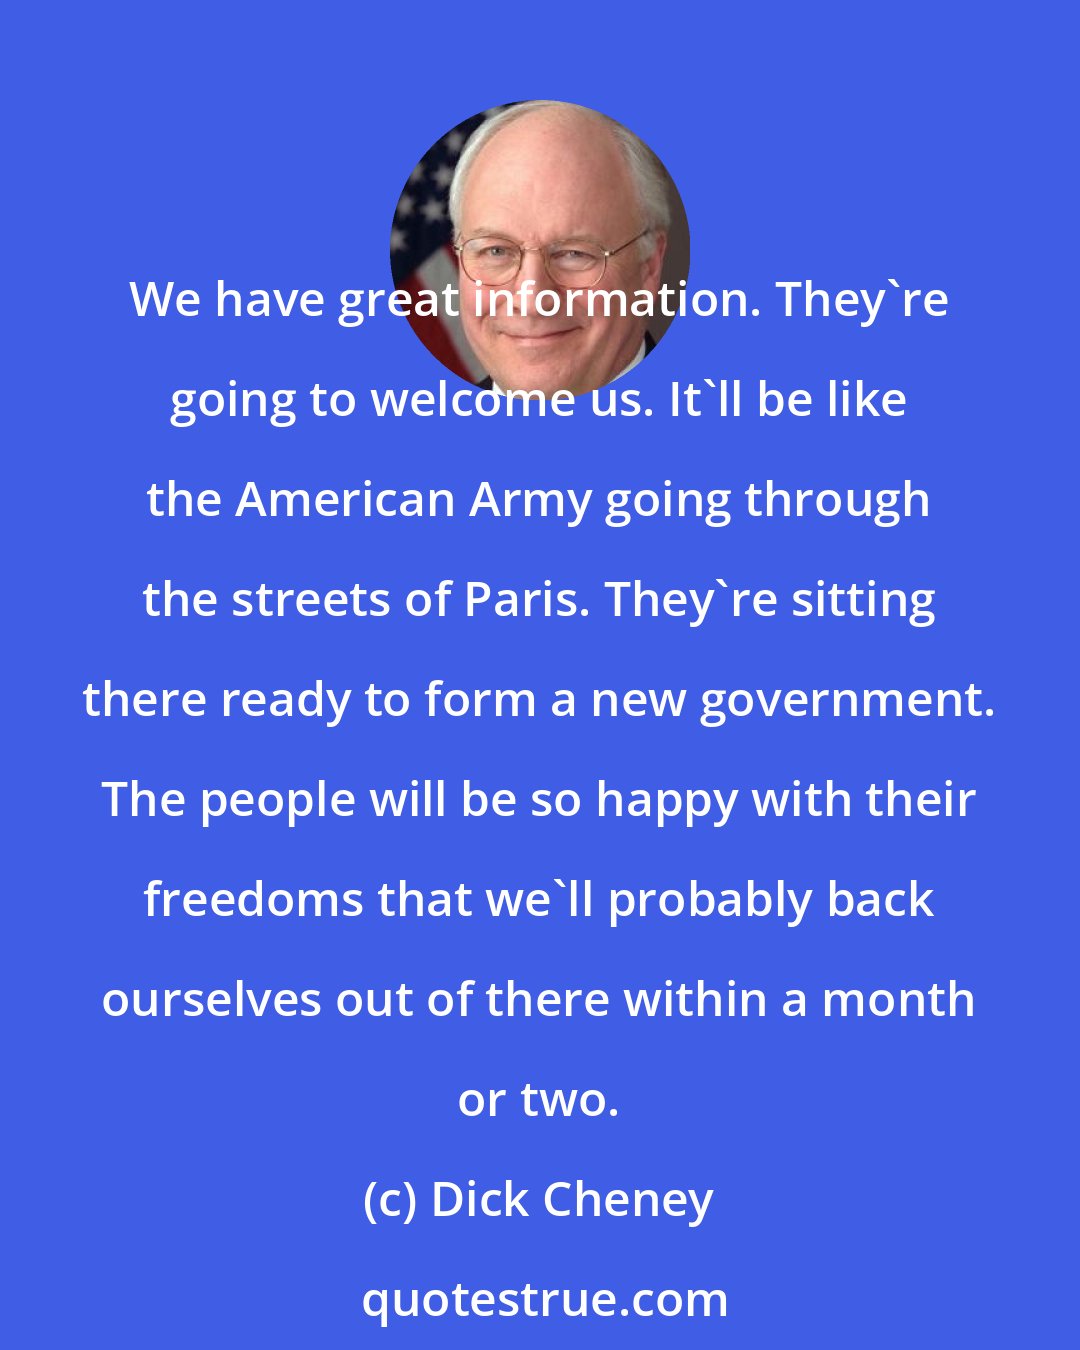 Dick Cheney: We have great information. They're going to welcome us. It'll be like the American Army going through the streets of Paris. They're sitting there ready to form a new government. The people will be so happy with their freedoms that we'll probably back ourselves out of there within a month or two.